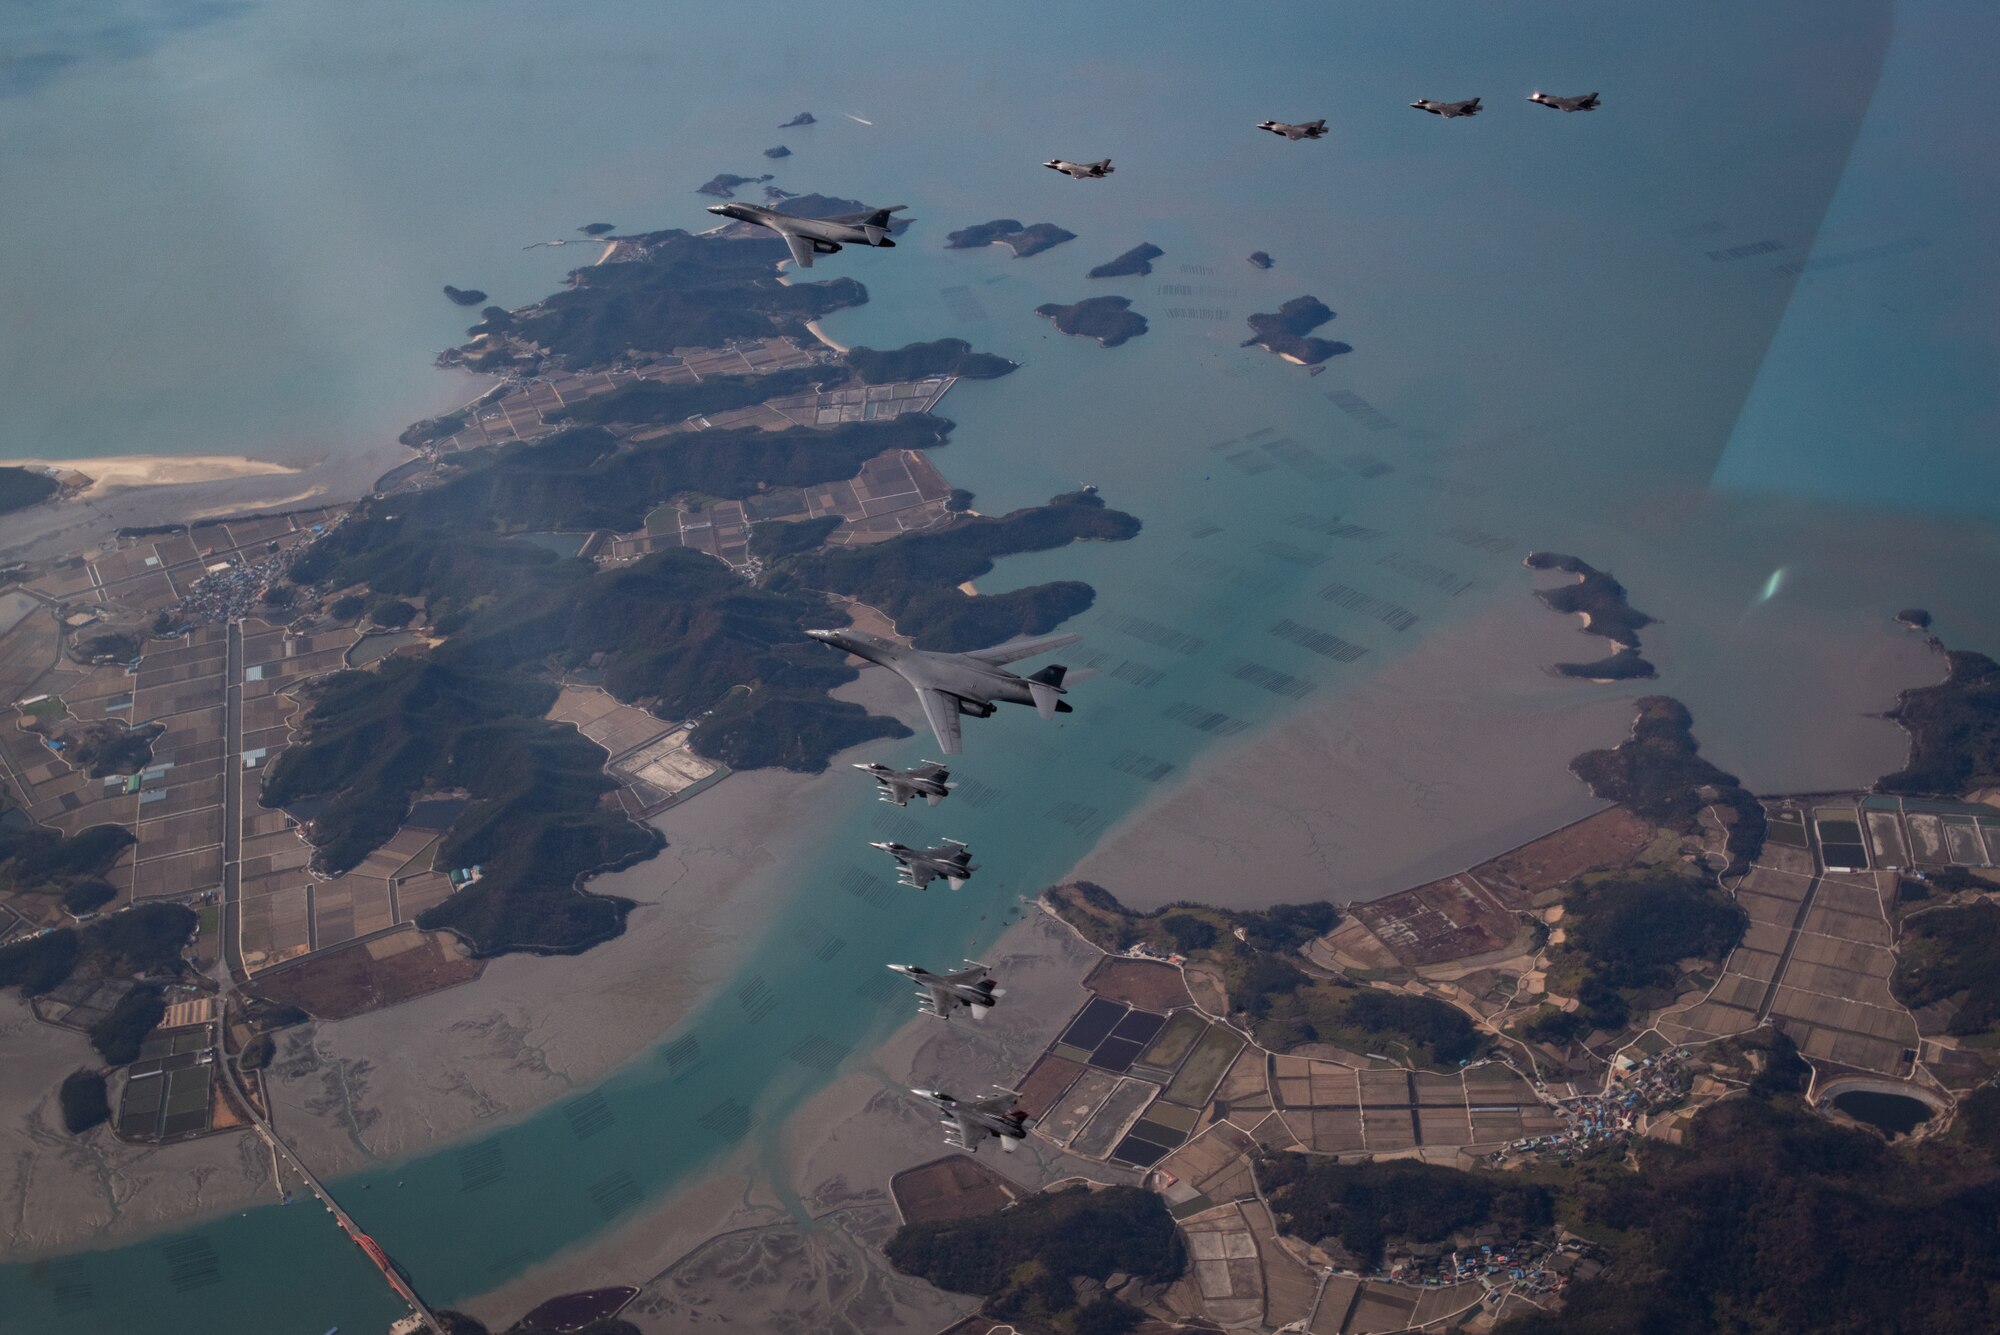 U.S. Air Force F-16s from the 51st Fighter Wing joined with Republic of Korea F-35As to escort two U.S. B-1B strategic bombers entering the Korean Air Defense Identification Zone and conducted a combined flight in a formation on Nov. 19, 2022.